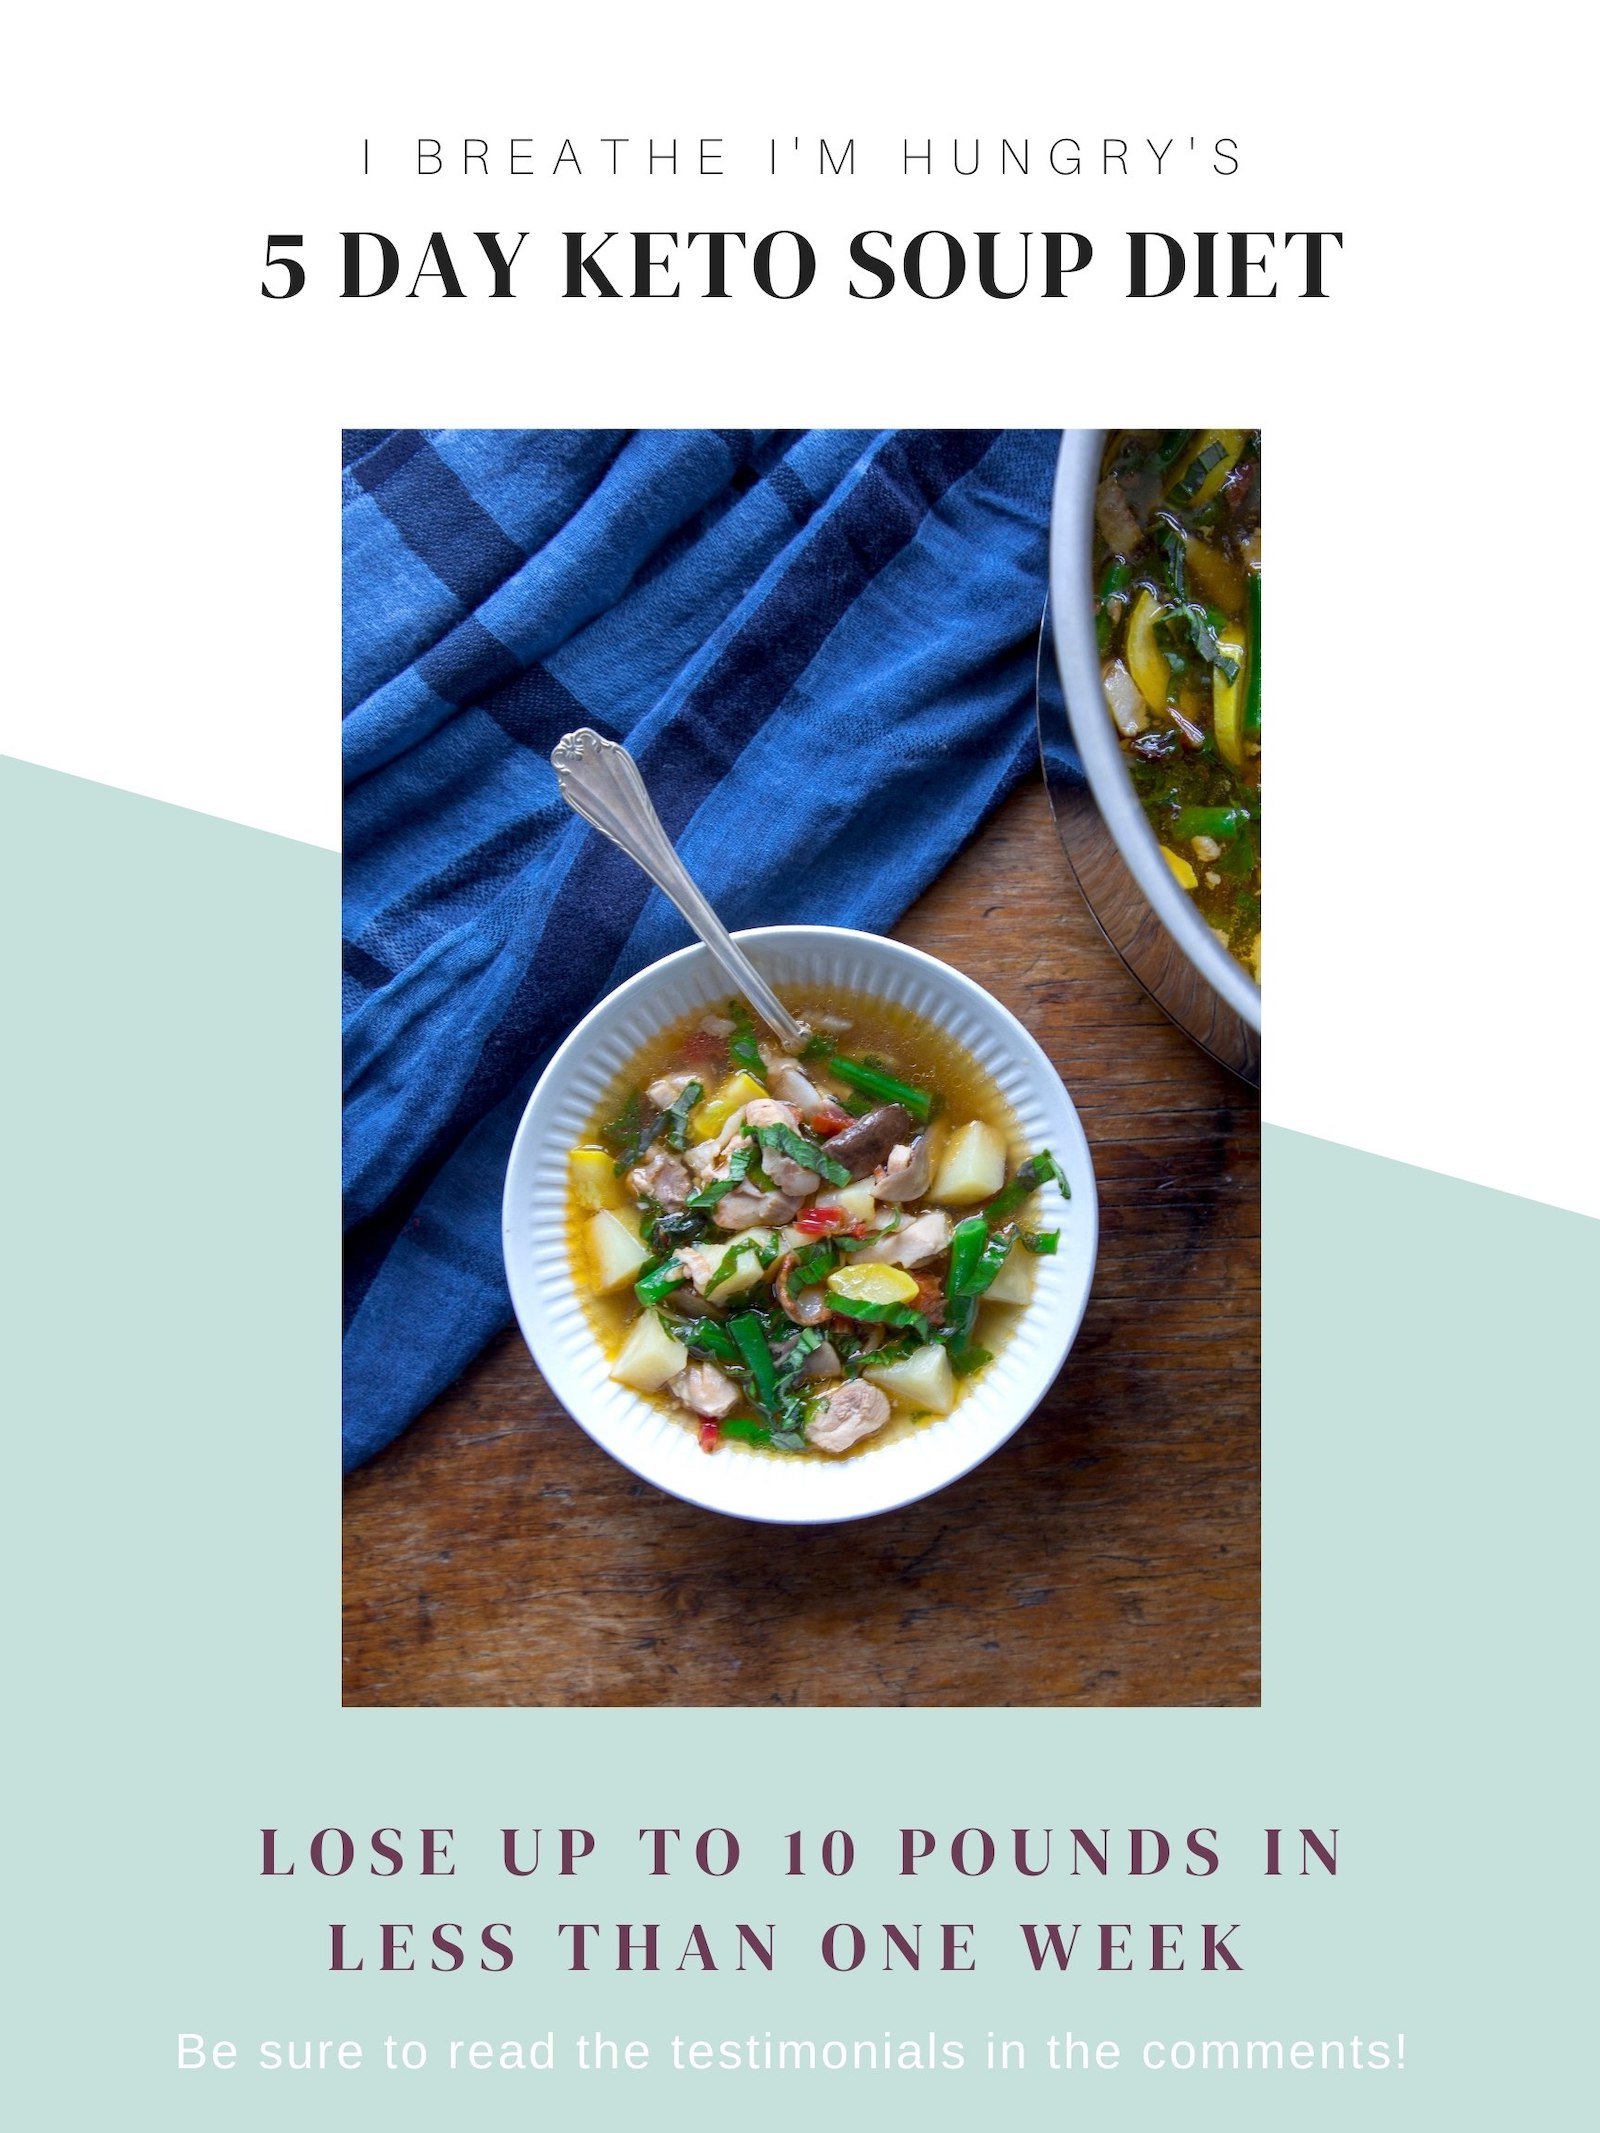 Keto Soup Diet   Free 20 Day Plan   I Breathe I'm Hungry